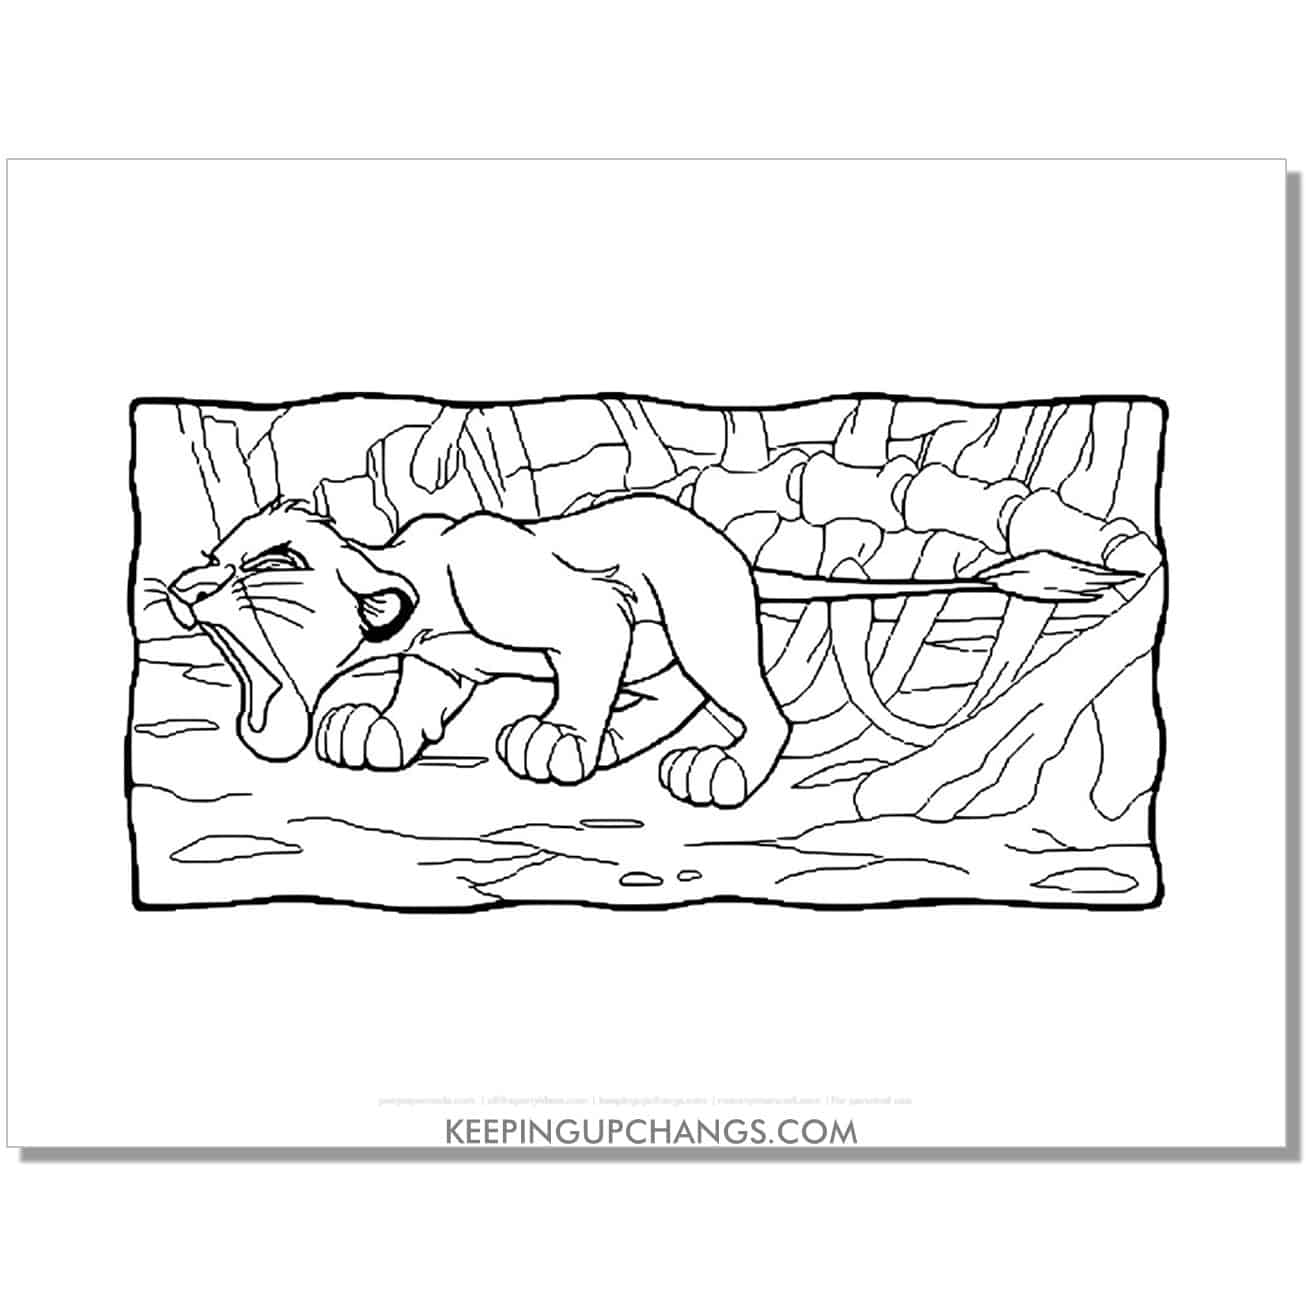 simba tries to roar in elephant graveyard lion king coloring page, sheet.